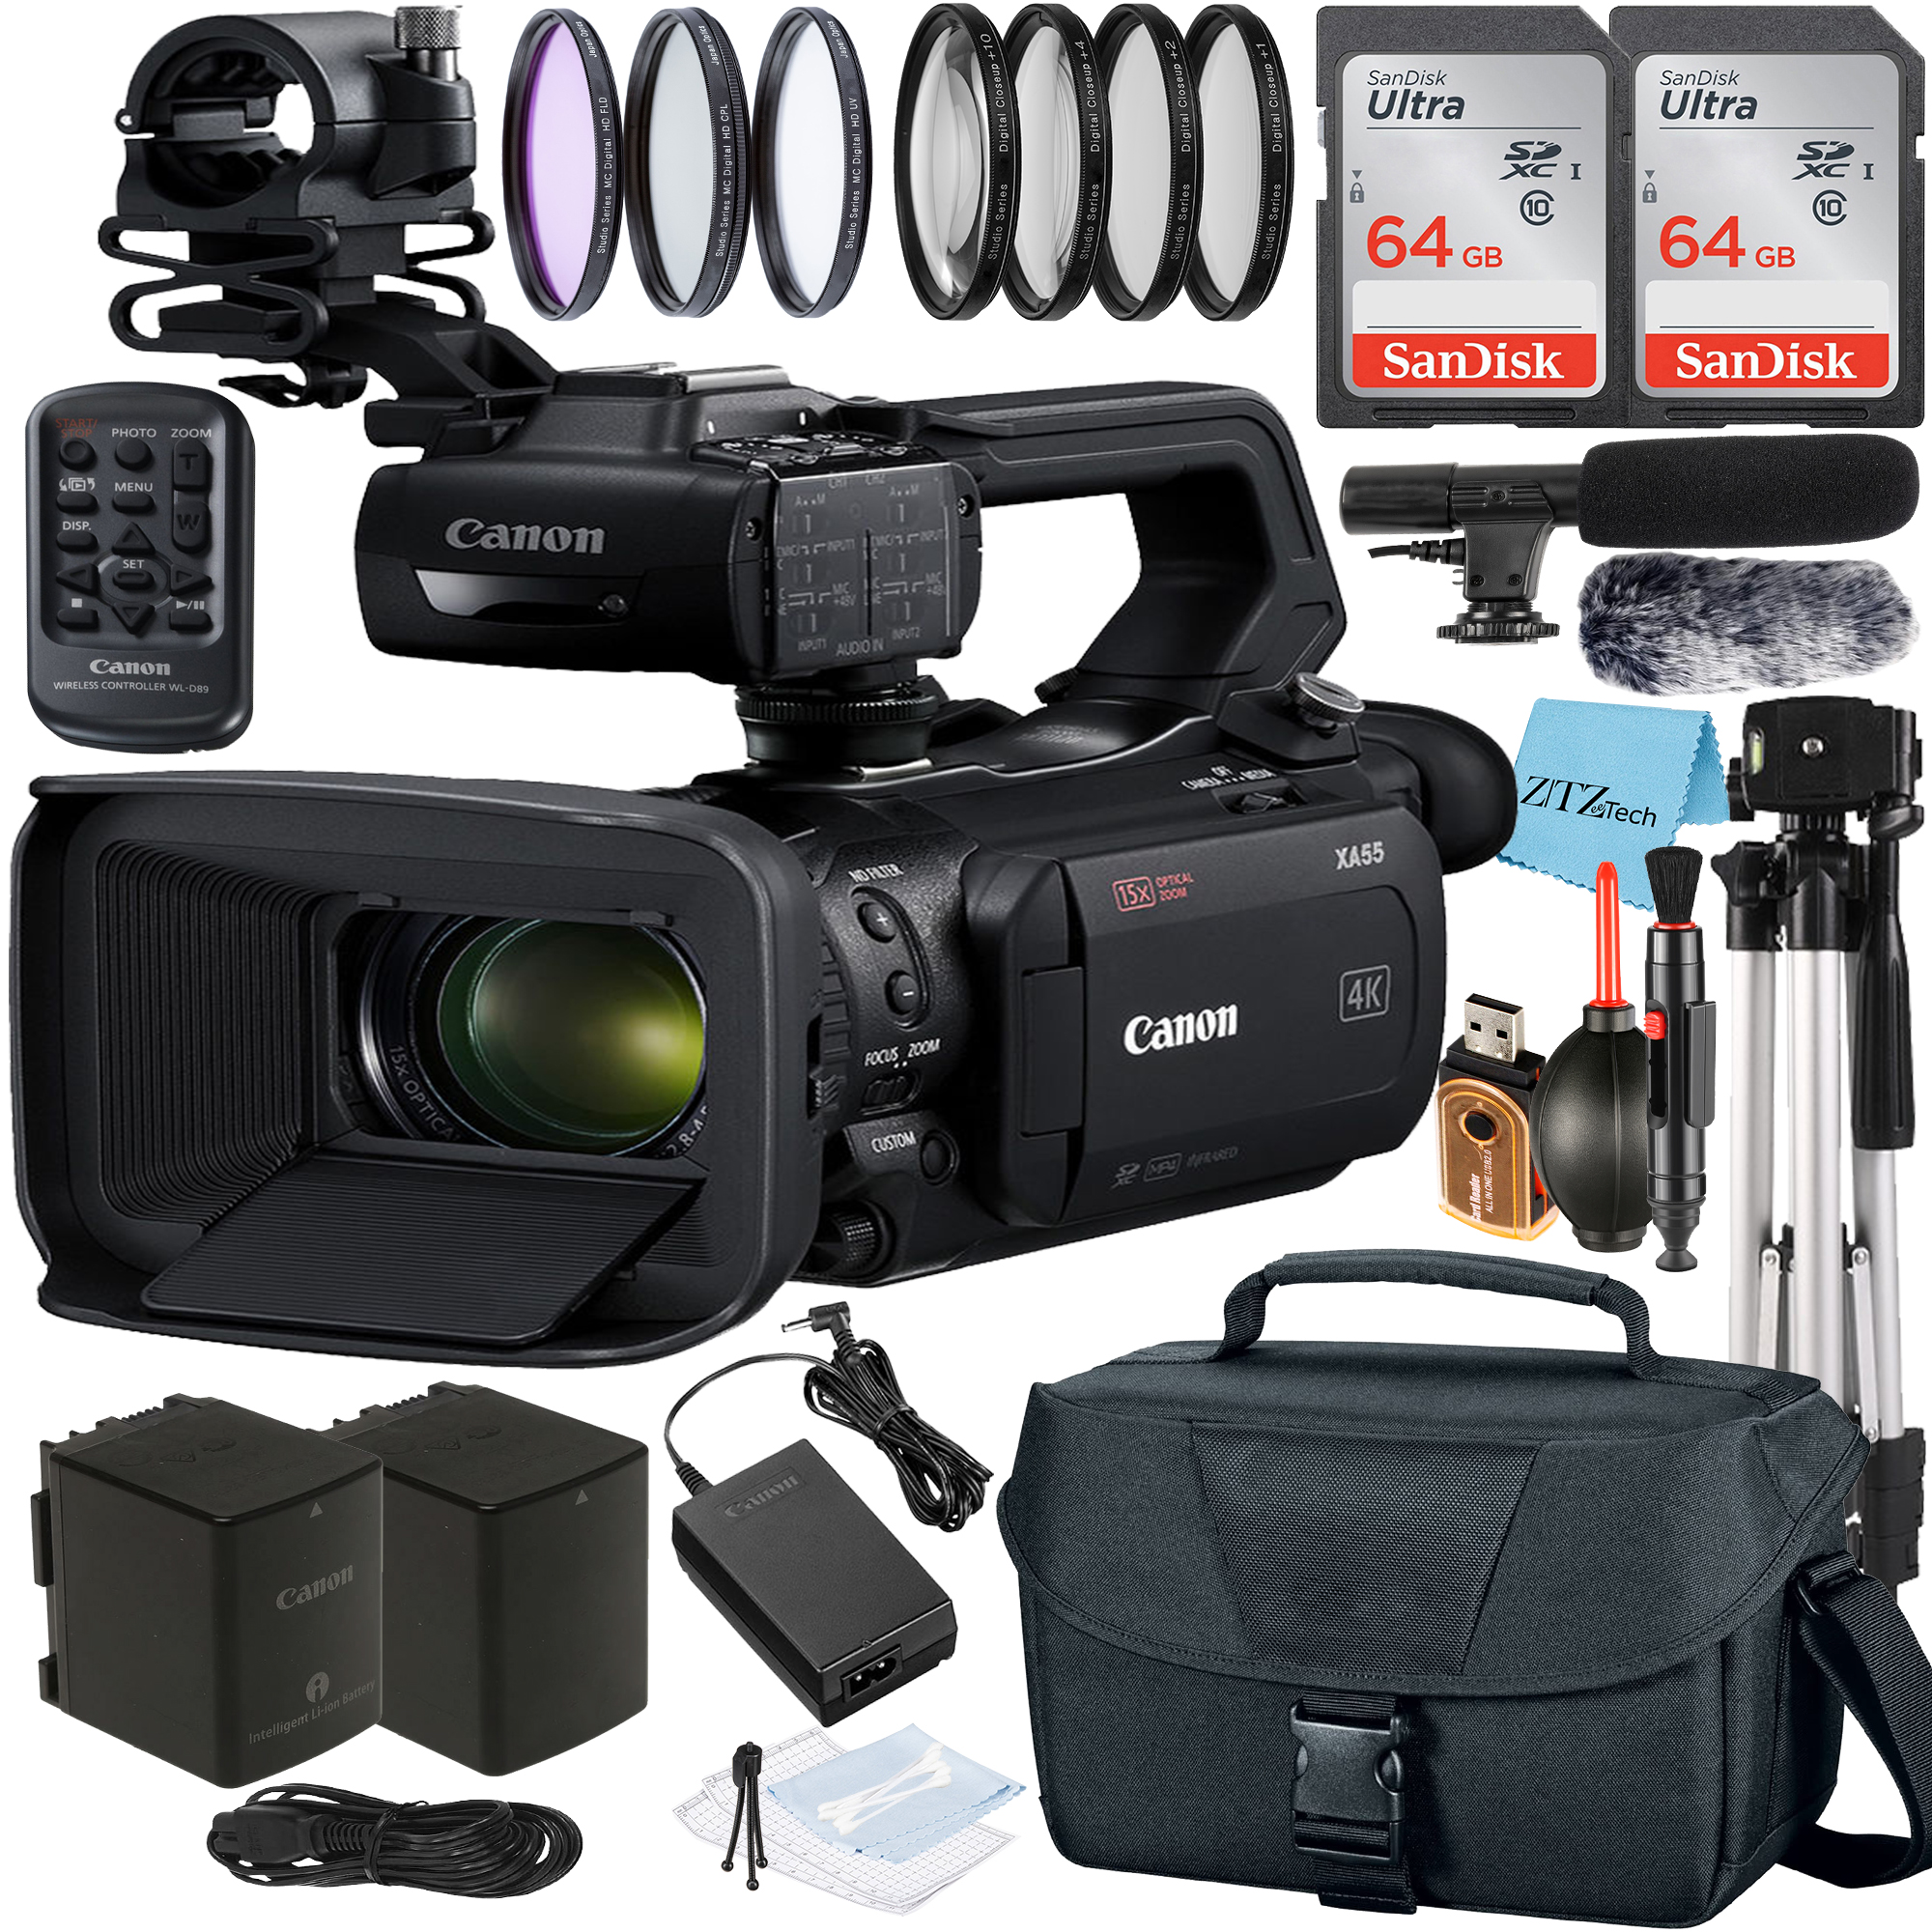 Canon XA55 UHD 4K30 Video Camcorder with 2 Pack 64GB SanDisk Card + Case + Tripod + Microphone + ZeeTech Accessory